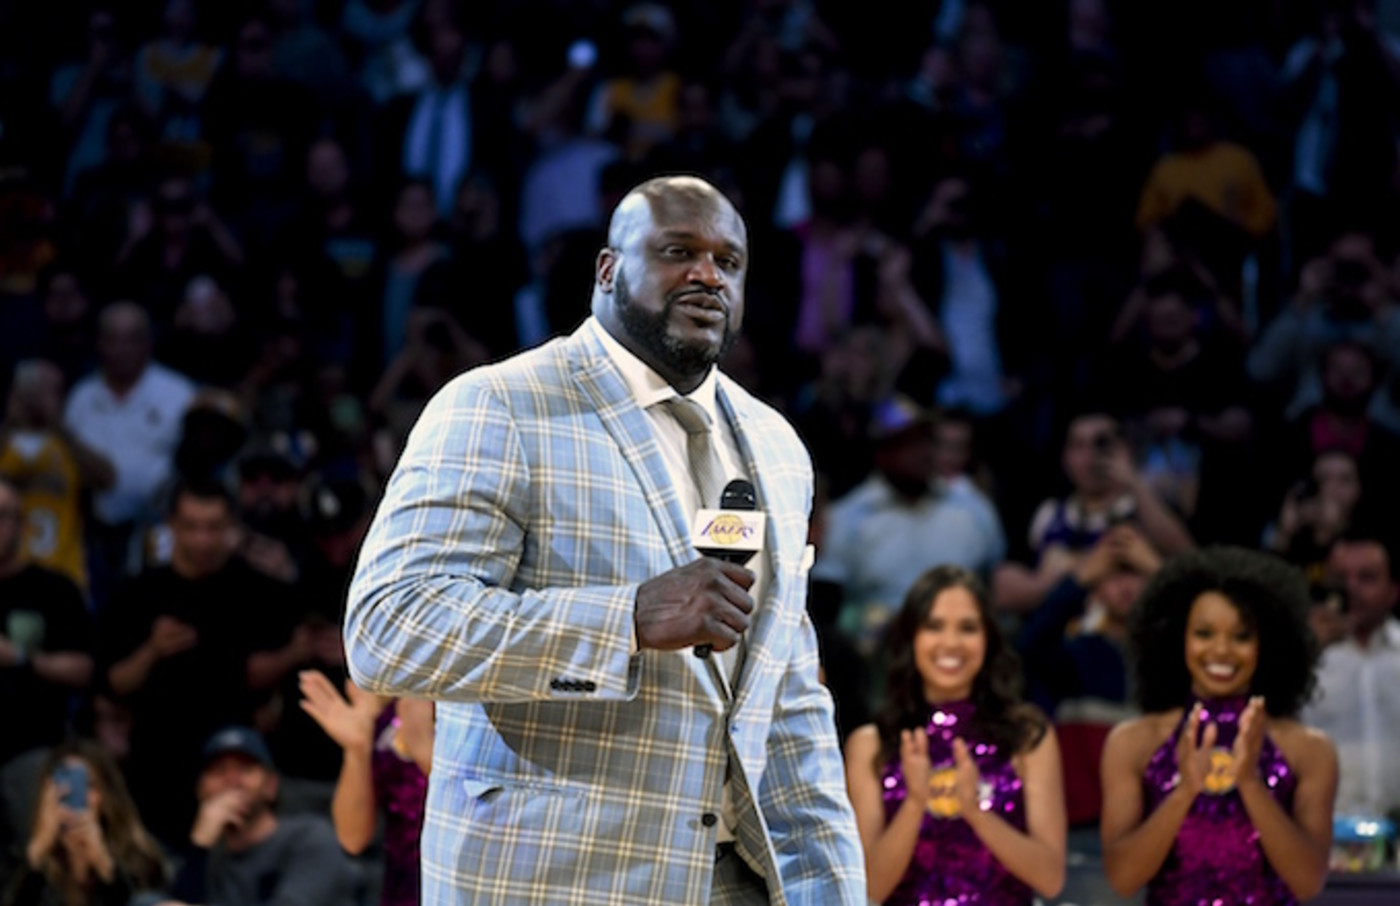 Shaqs nude hijinks remembered by former coaches